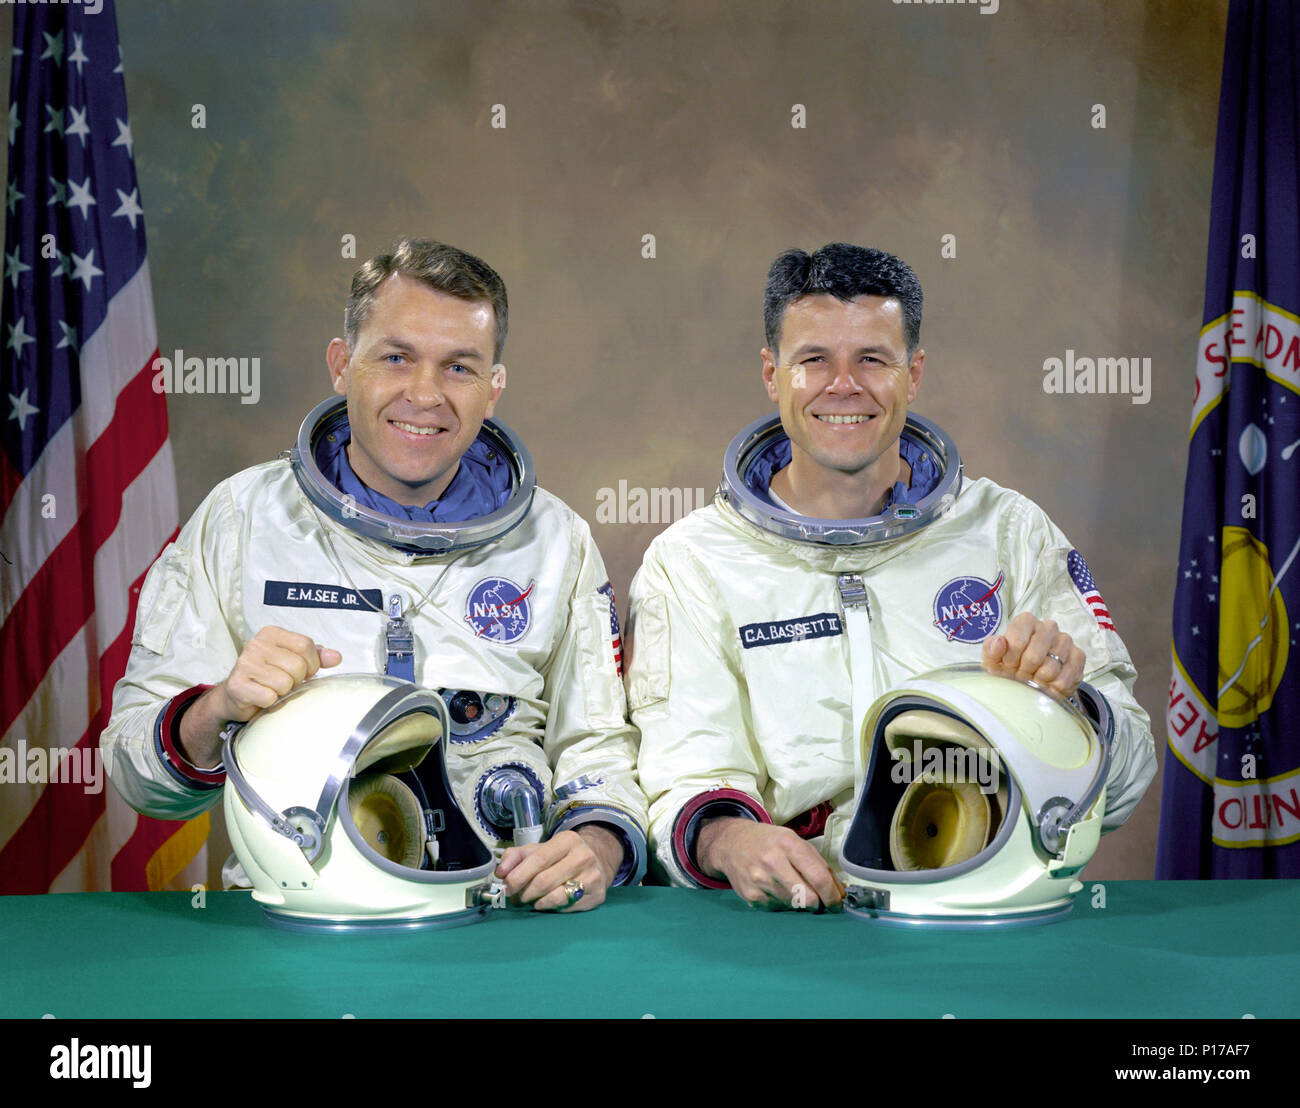 The original Gemini 9 prime crew, astronauts Elliot M. See Jr. (left), command pilot, and Charles A. Bassett II, pilot, in space suits with their helmets on the table in front of them. On February 28, 1966 the prime crew for the Gemini 9 mission were killed when their twin seat T-38 trainer jet aircraft crashed into a building in which the Gemini spacecraft were being manufactured. They were on final approach to Lambert-Saint Louis Municipal Airport when bad weather conditions hampered pilot See's ability to make a good visual contact with the runway. Noticing the building at the last second a Stock Photo